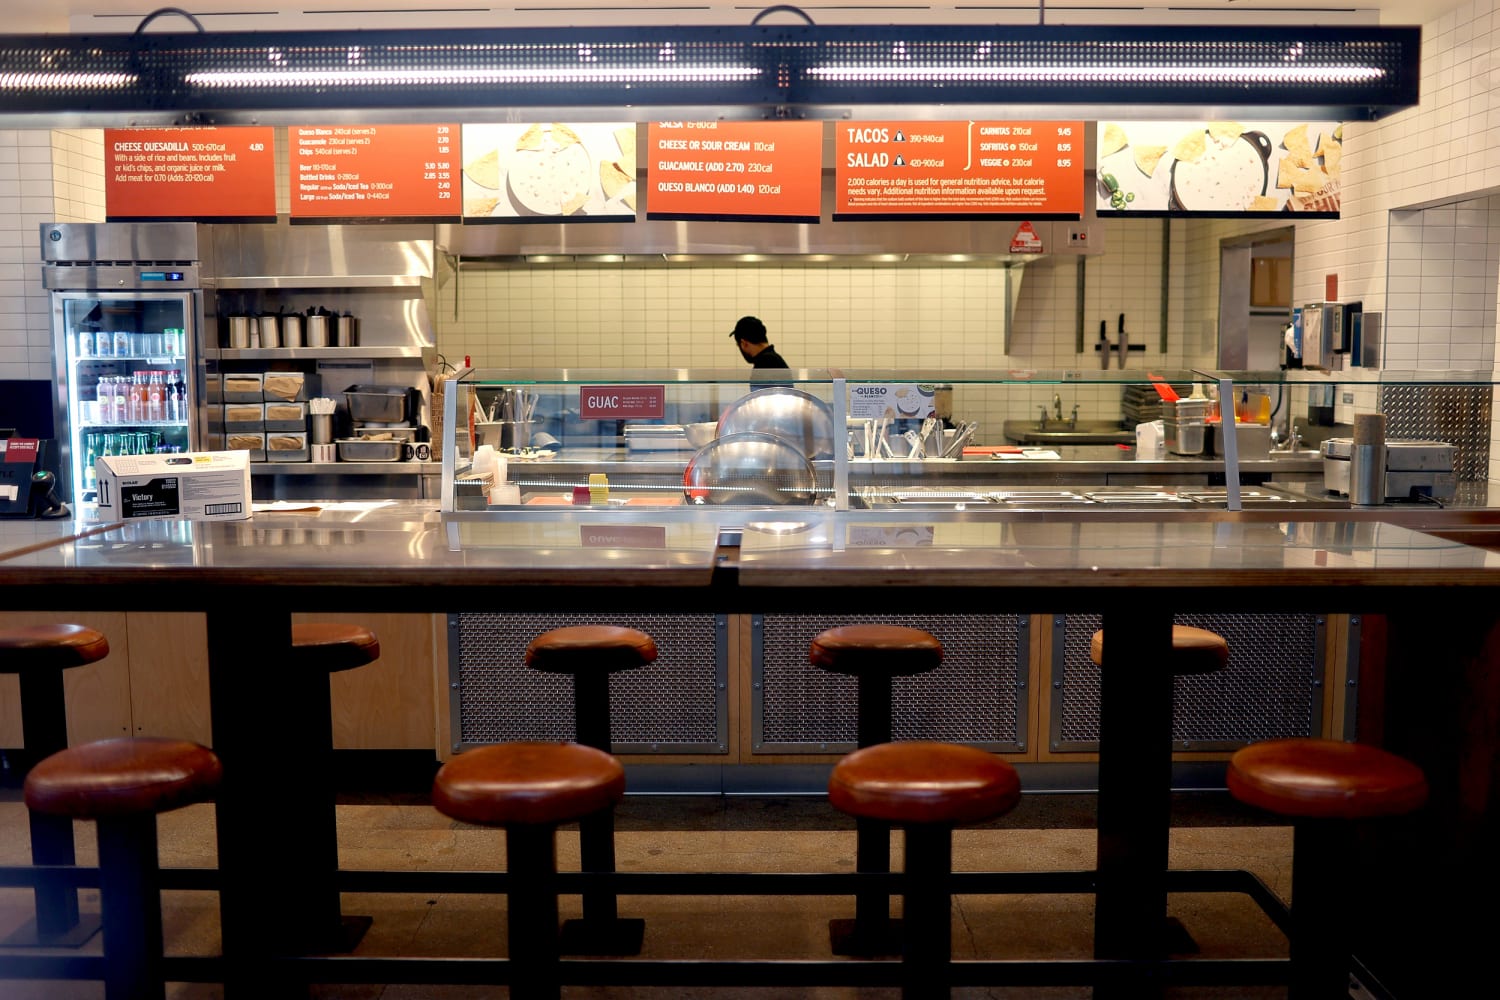 Is Chipotle Fast Food or Fast Casual?